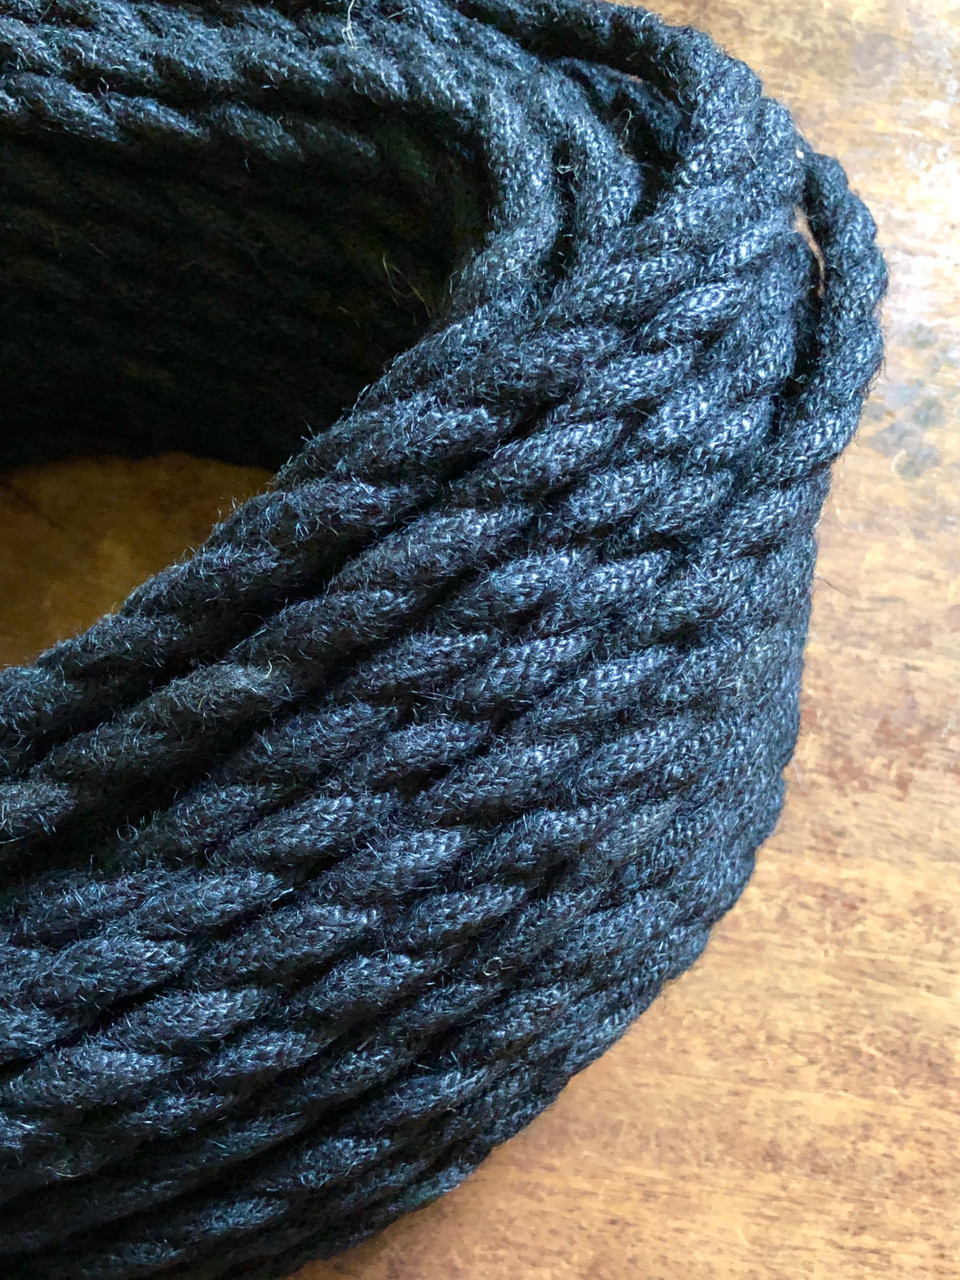 Black Jute Covered (Rope Style) Twisted Wire - PER FOOT